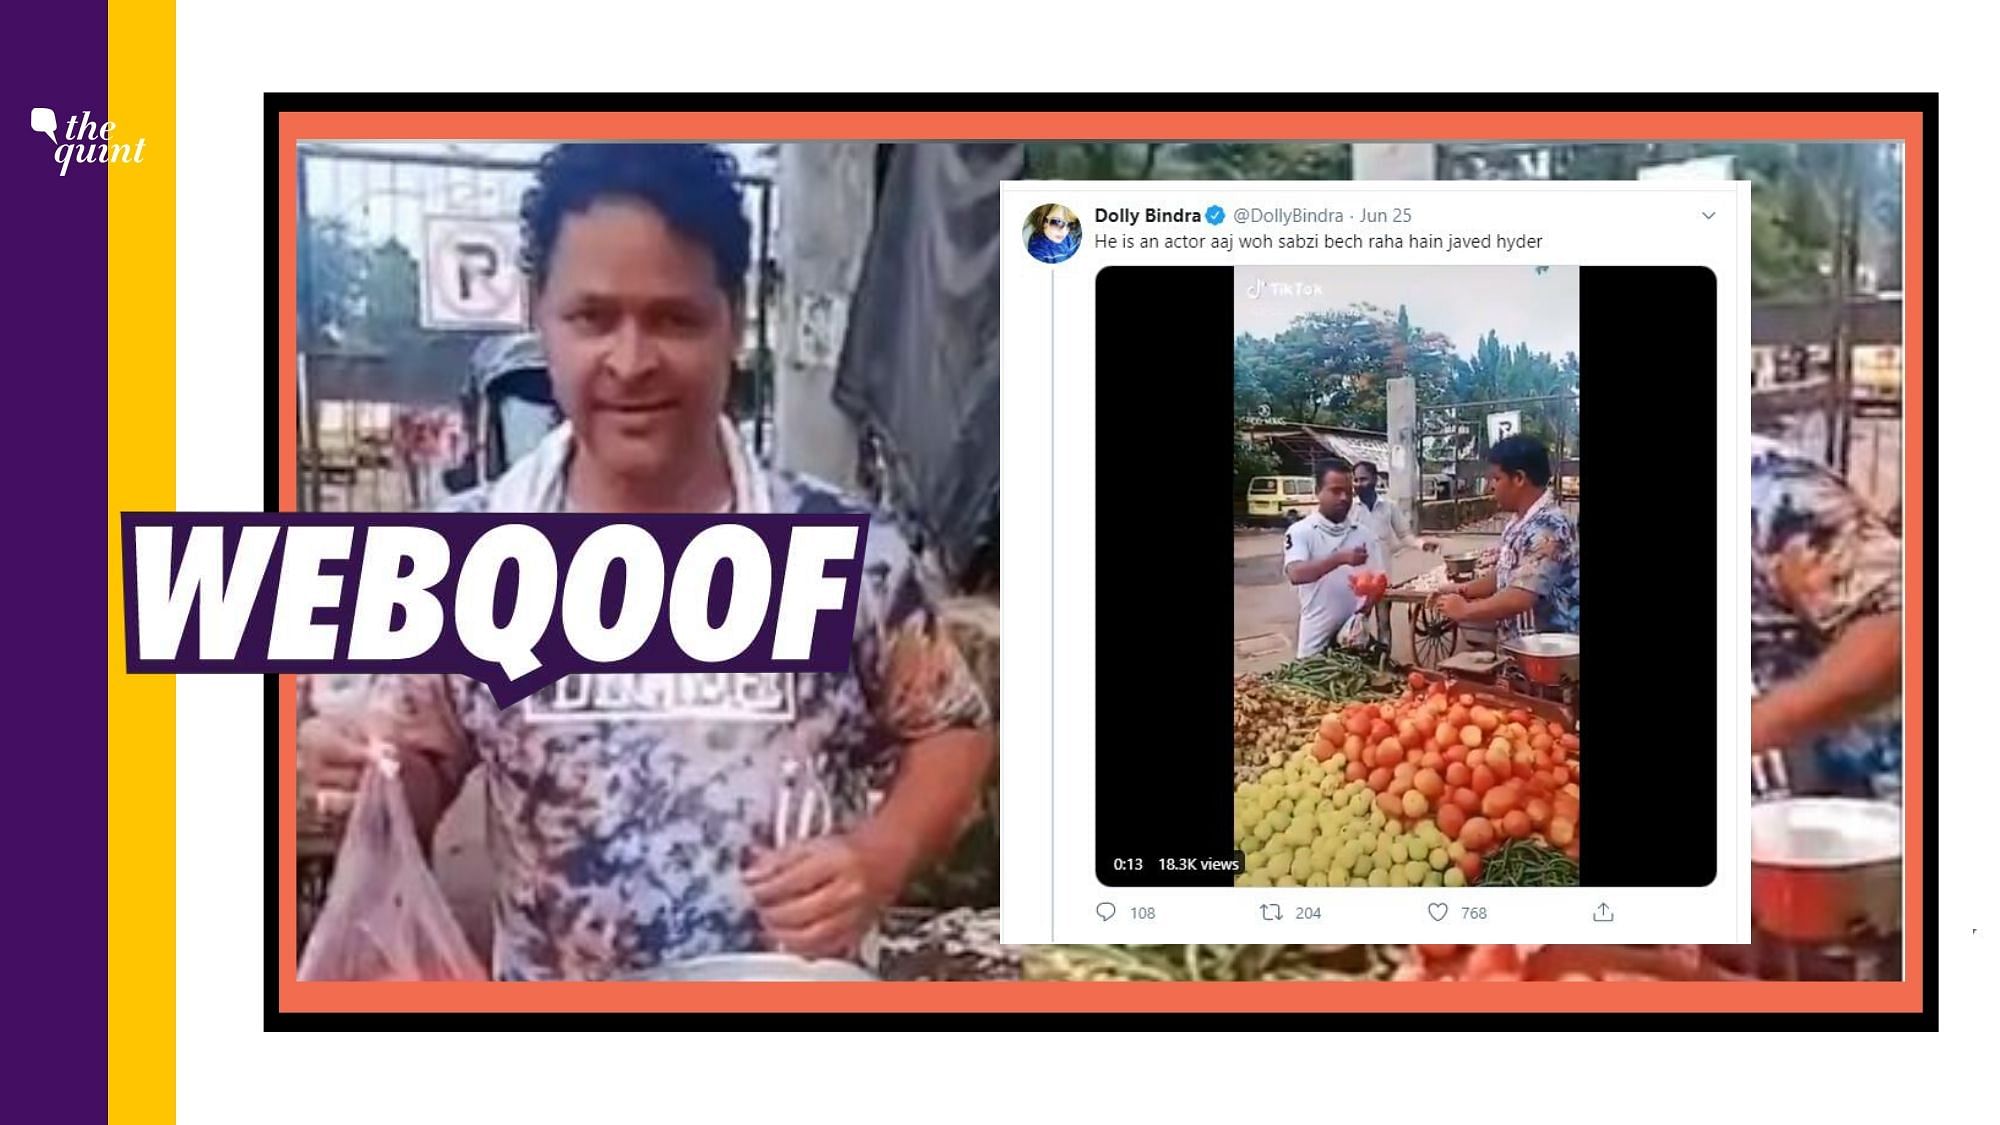 Several news outlets fell for a TikTok video by Bollywood actor Javed Hyder stating that due to financial difficulties, the actor has now turned to selling vegetables to make ends meet.